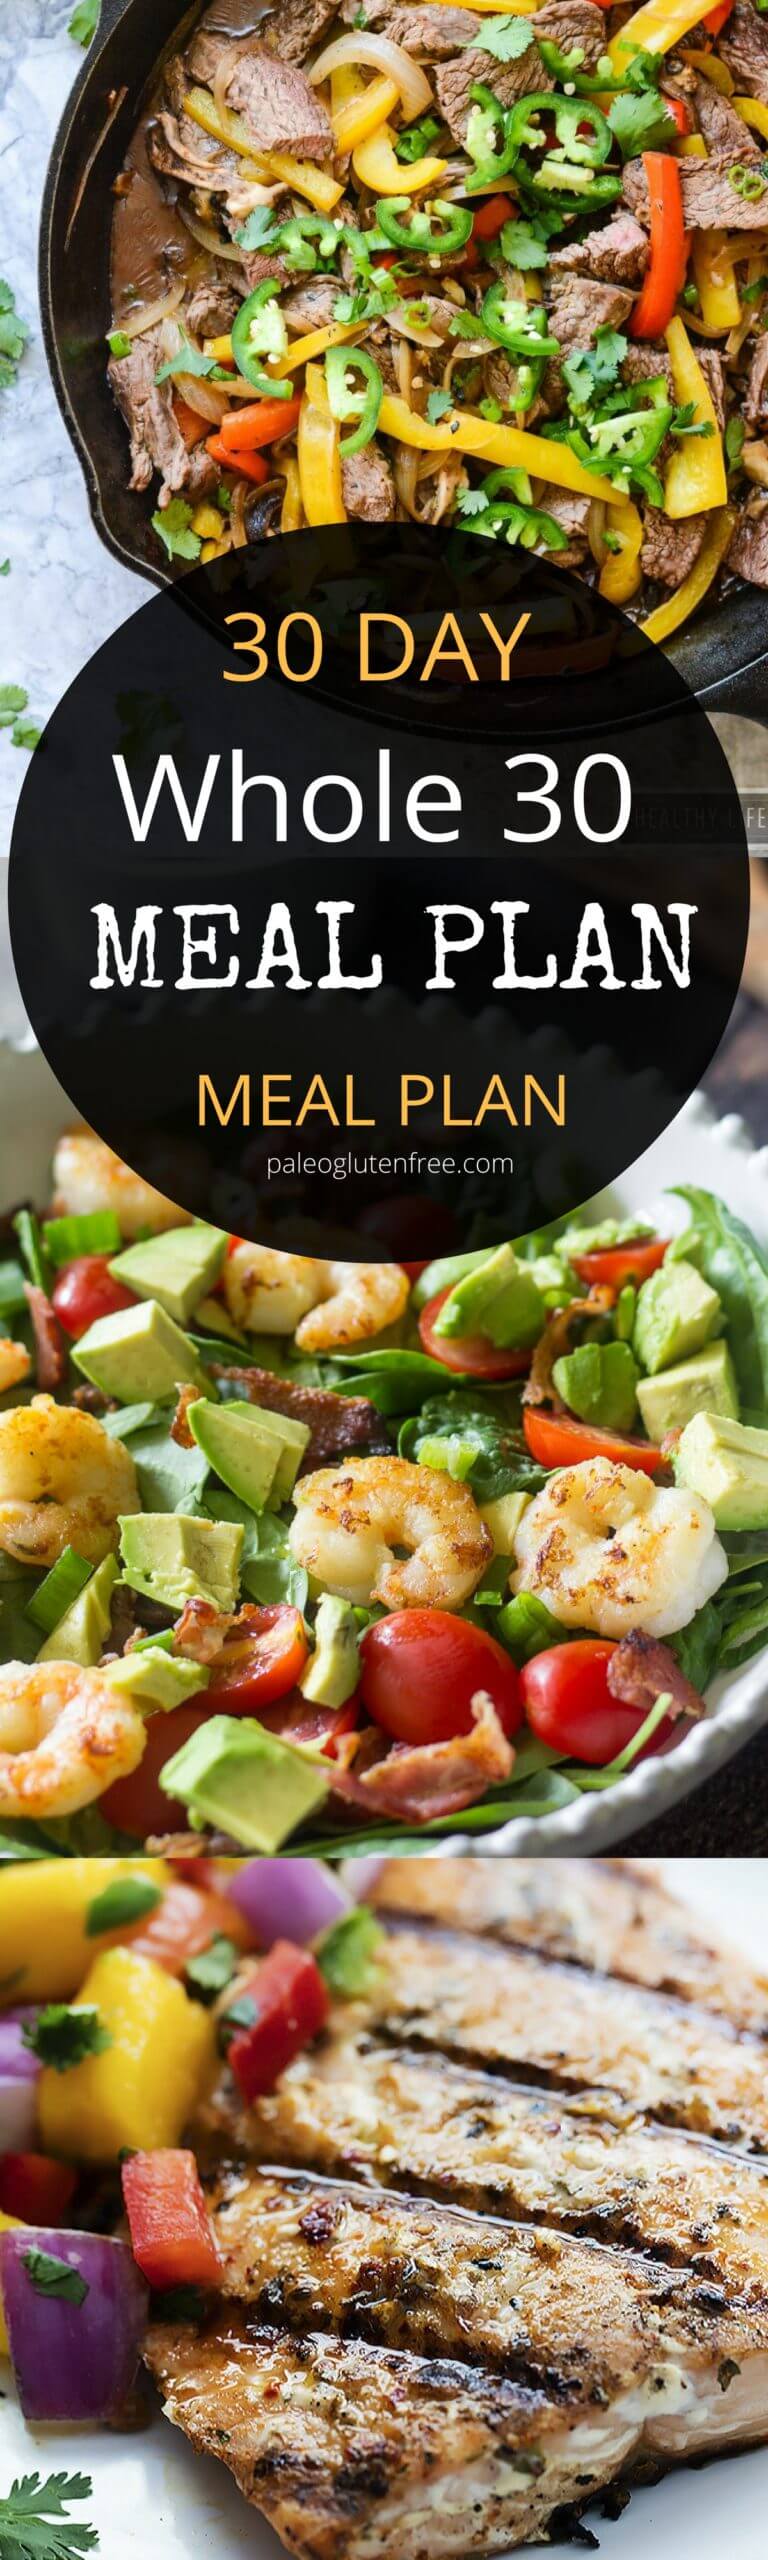 Whole 30 Meal Plan for 30 Days! Paleo Gluten Free